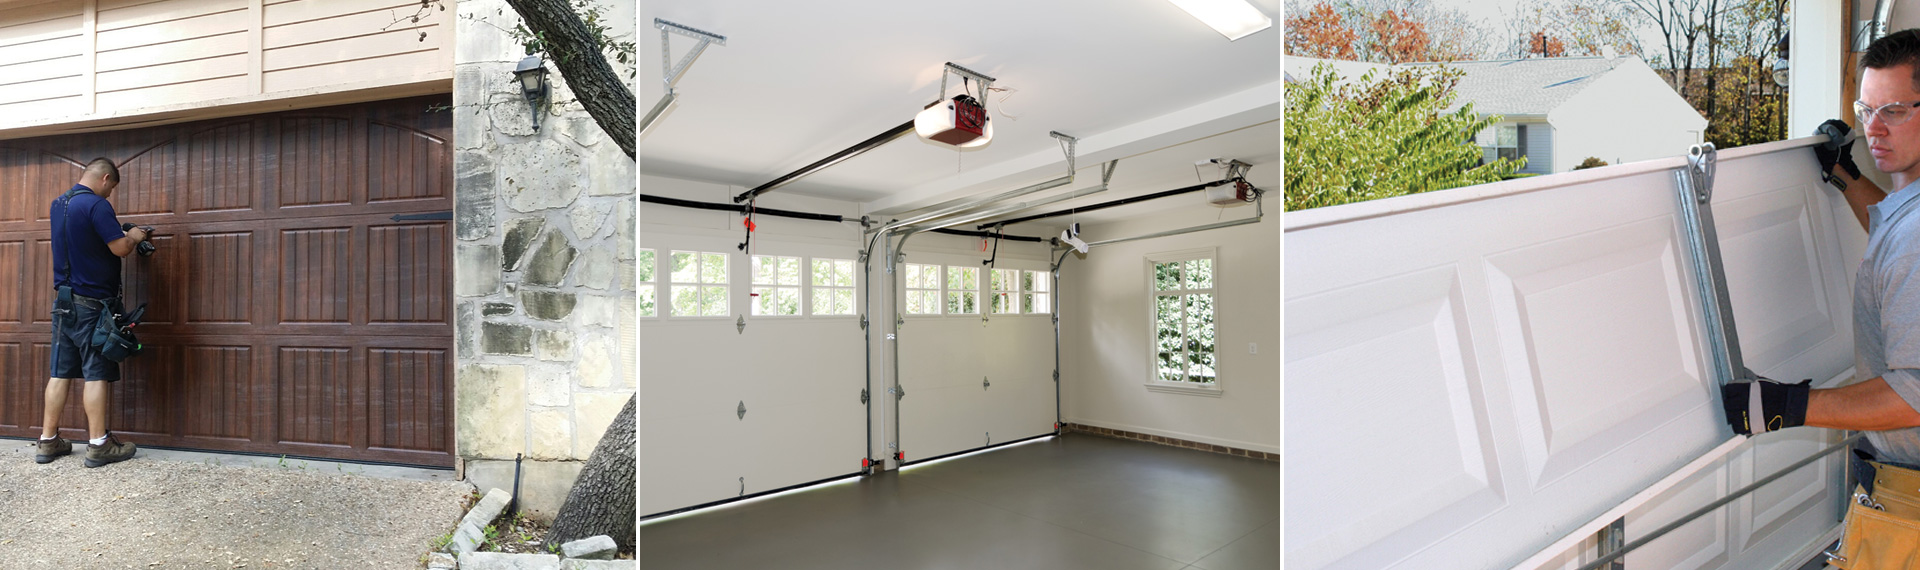 All Garage Door Services Chadds Ford PA